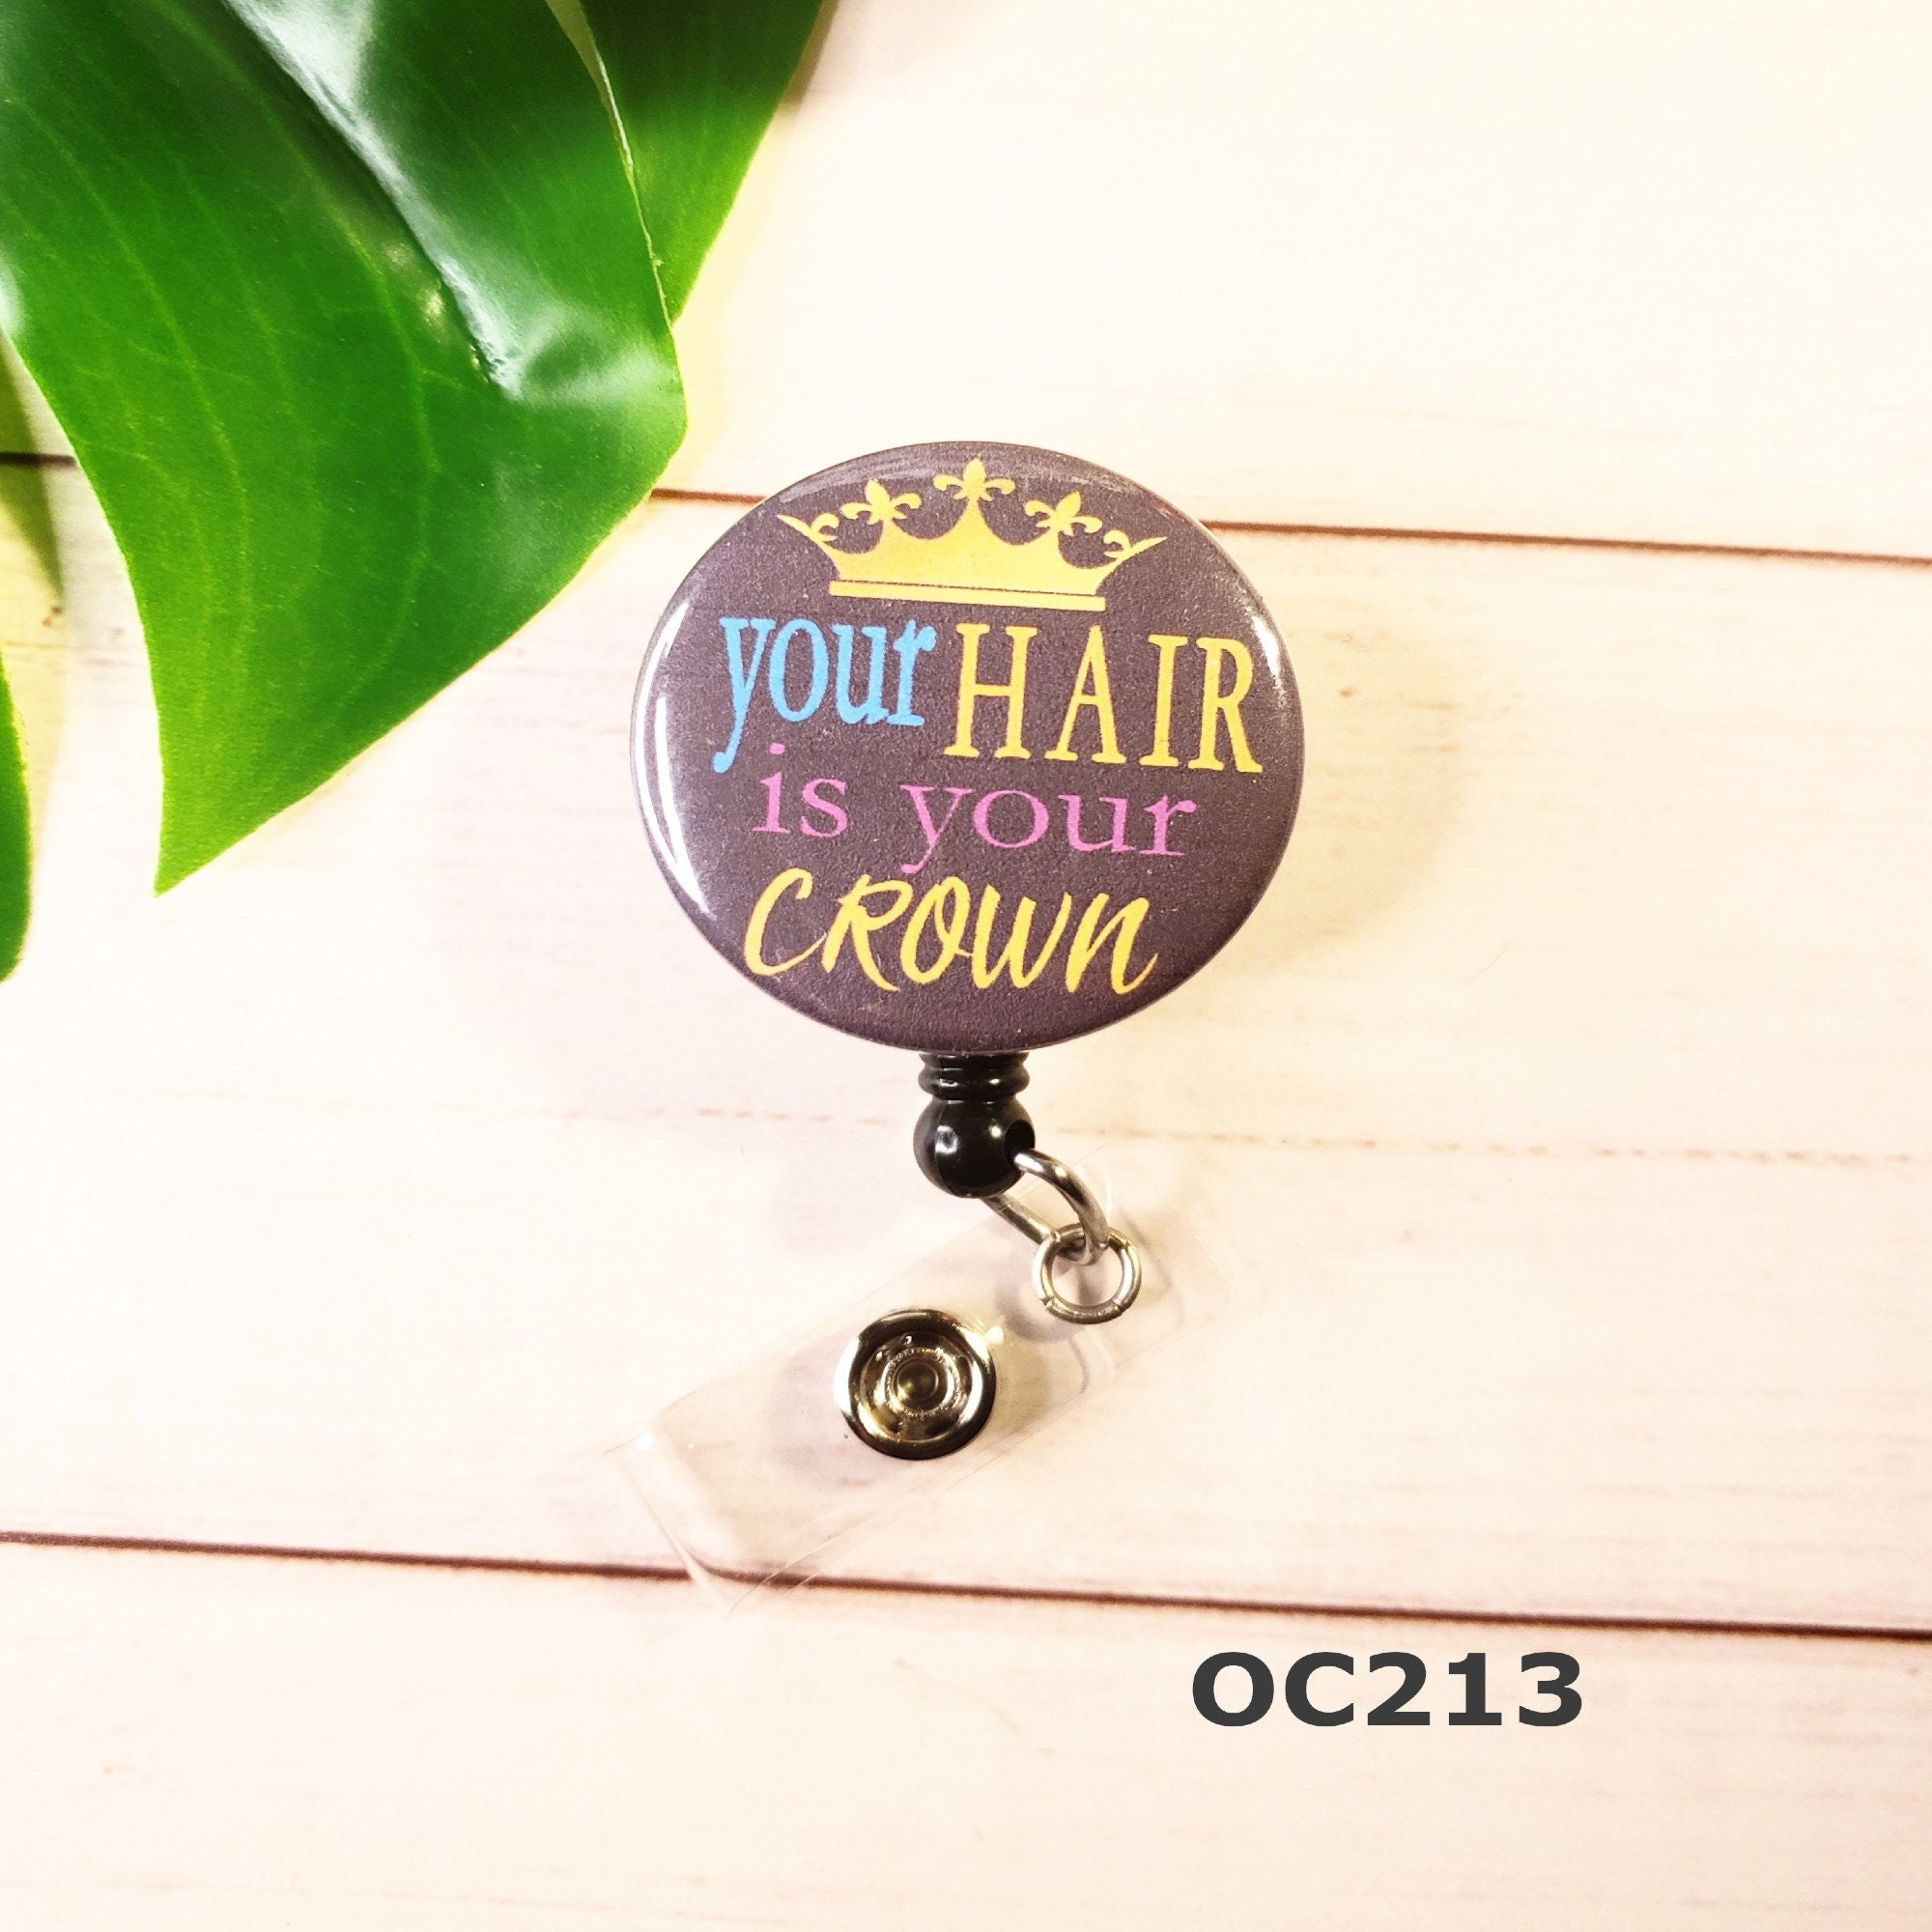 Hairstylist Badge Reels Your Hair is Your Crown Design, Beautician